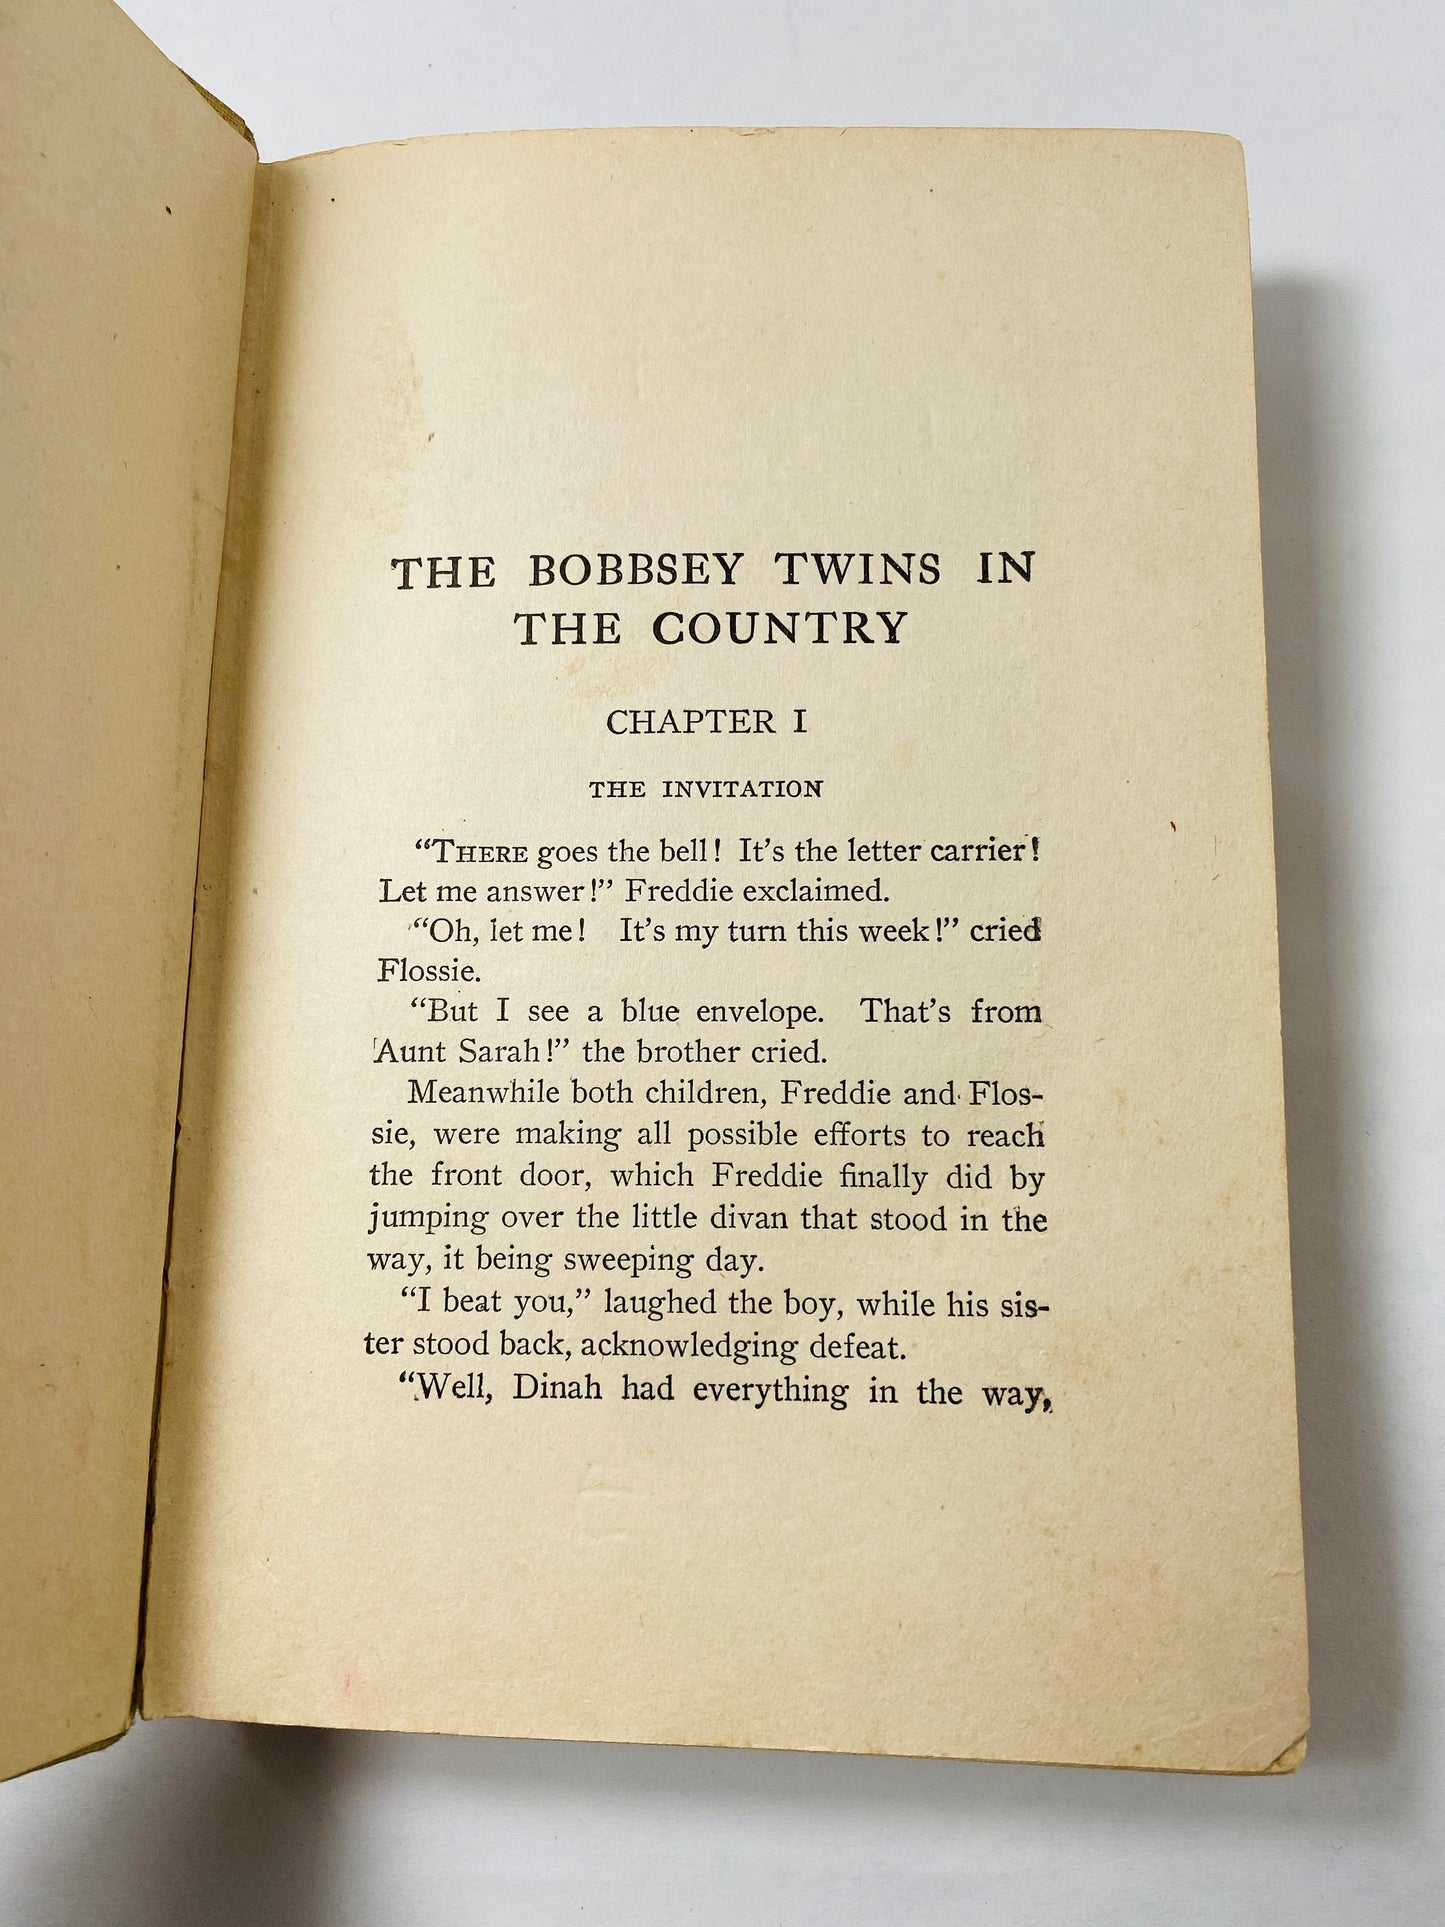 Bobbsey Twins in the Country vintage book circa 1922 by Laura Lee Hope. Antique beige white collectible. Poor Condition